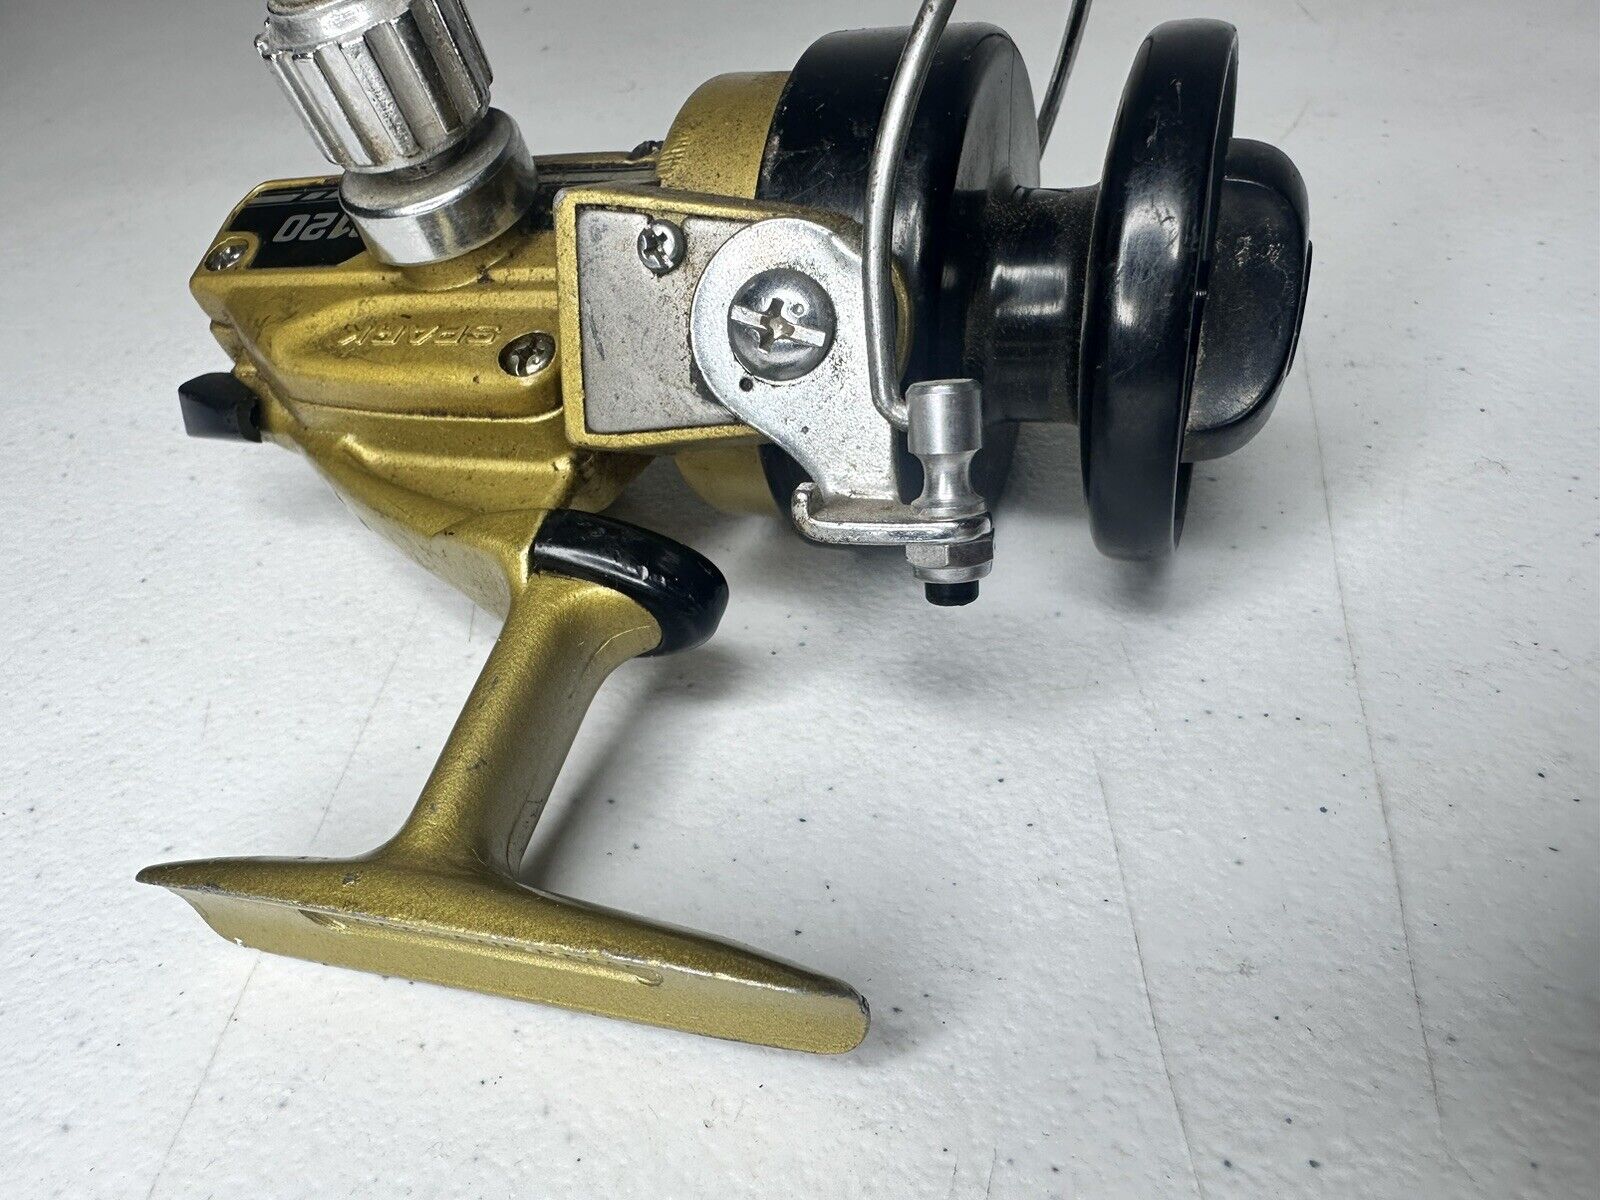 Rare Olympic Spark 3120 Vintage Gold Spinning Fishing Reel - Made in Korea - TreasuTiques